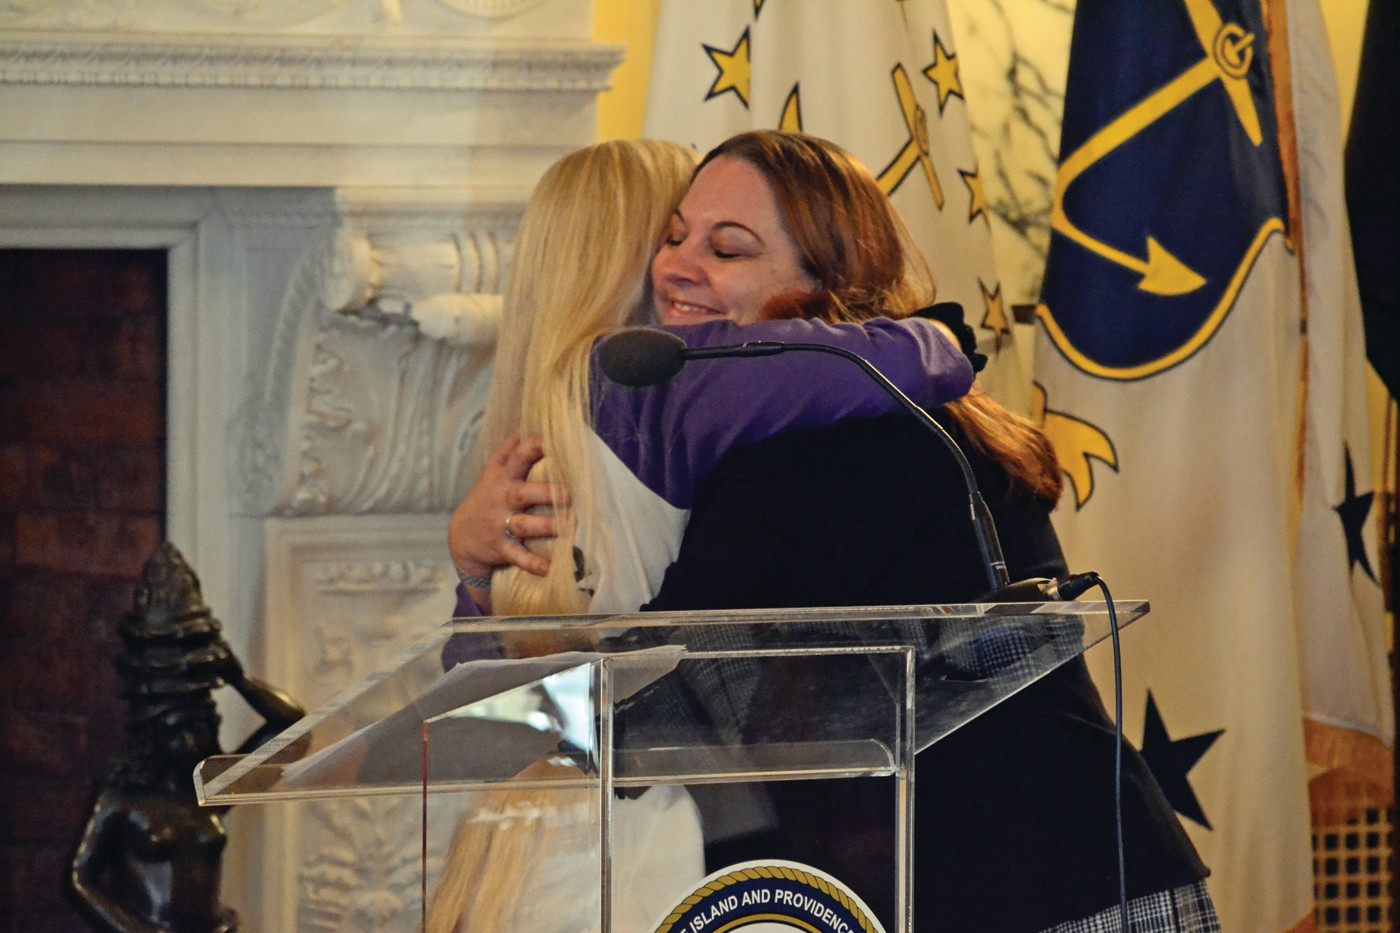 LIKE MOTHER LIKE DAUGHTER: Mary and Tara Townsend embrace after Mary introduced Tara as a caregiver of the year at the Rhode Island Statehouse. Tara said she could never have been as strong in caring for her disabled son without her mother’s love and support.